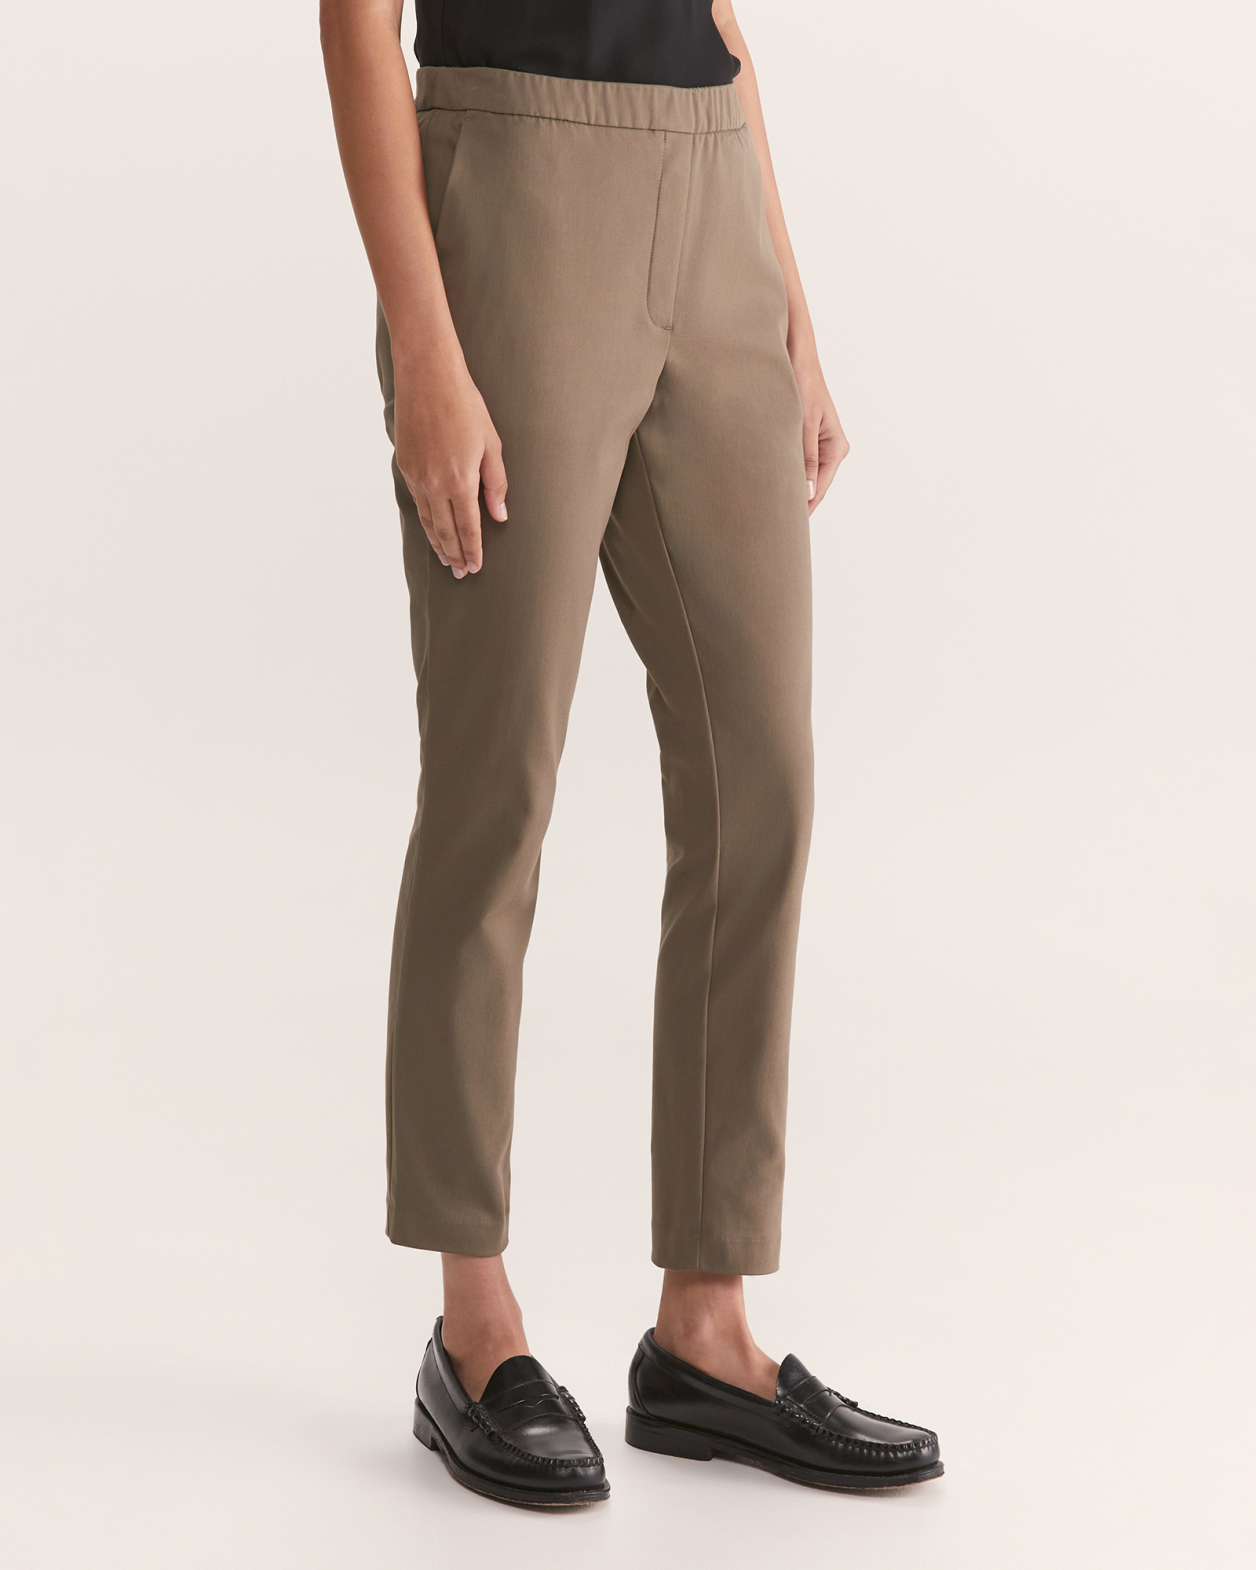 Tia Pull On Pant in OLIVE